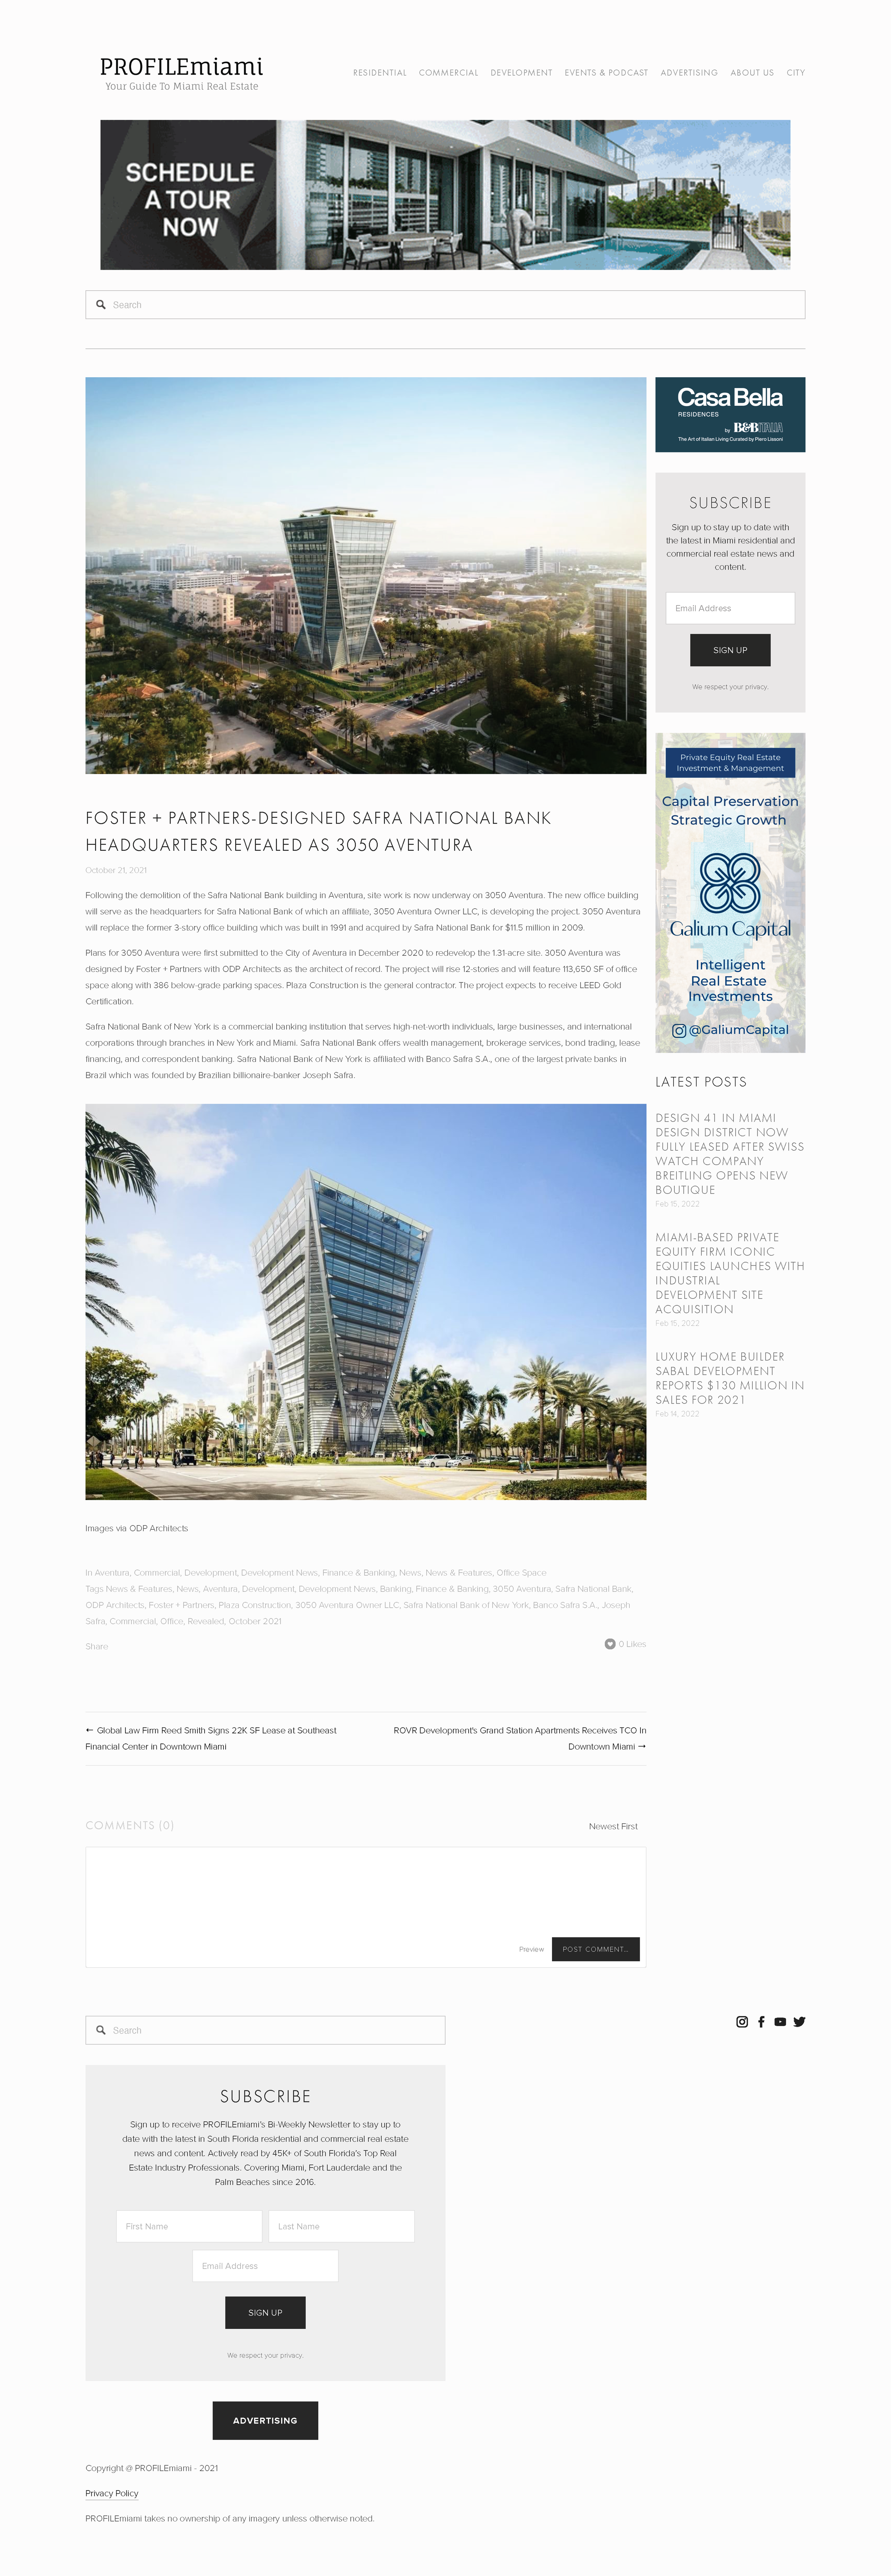 Foster + Partners-Designed Safra National Bank Headquarters Revealed As 3050 Aventura — PROFILE Miam.png